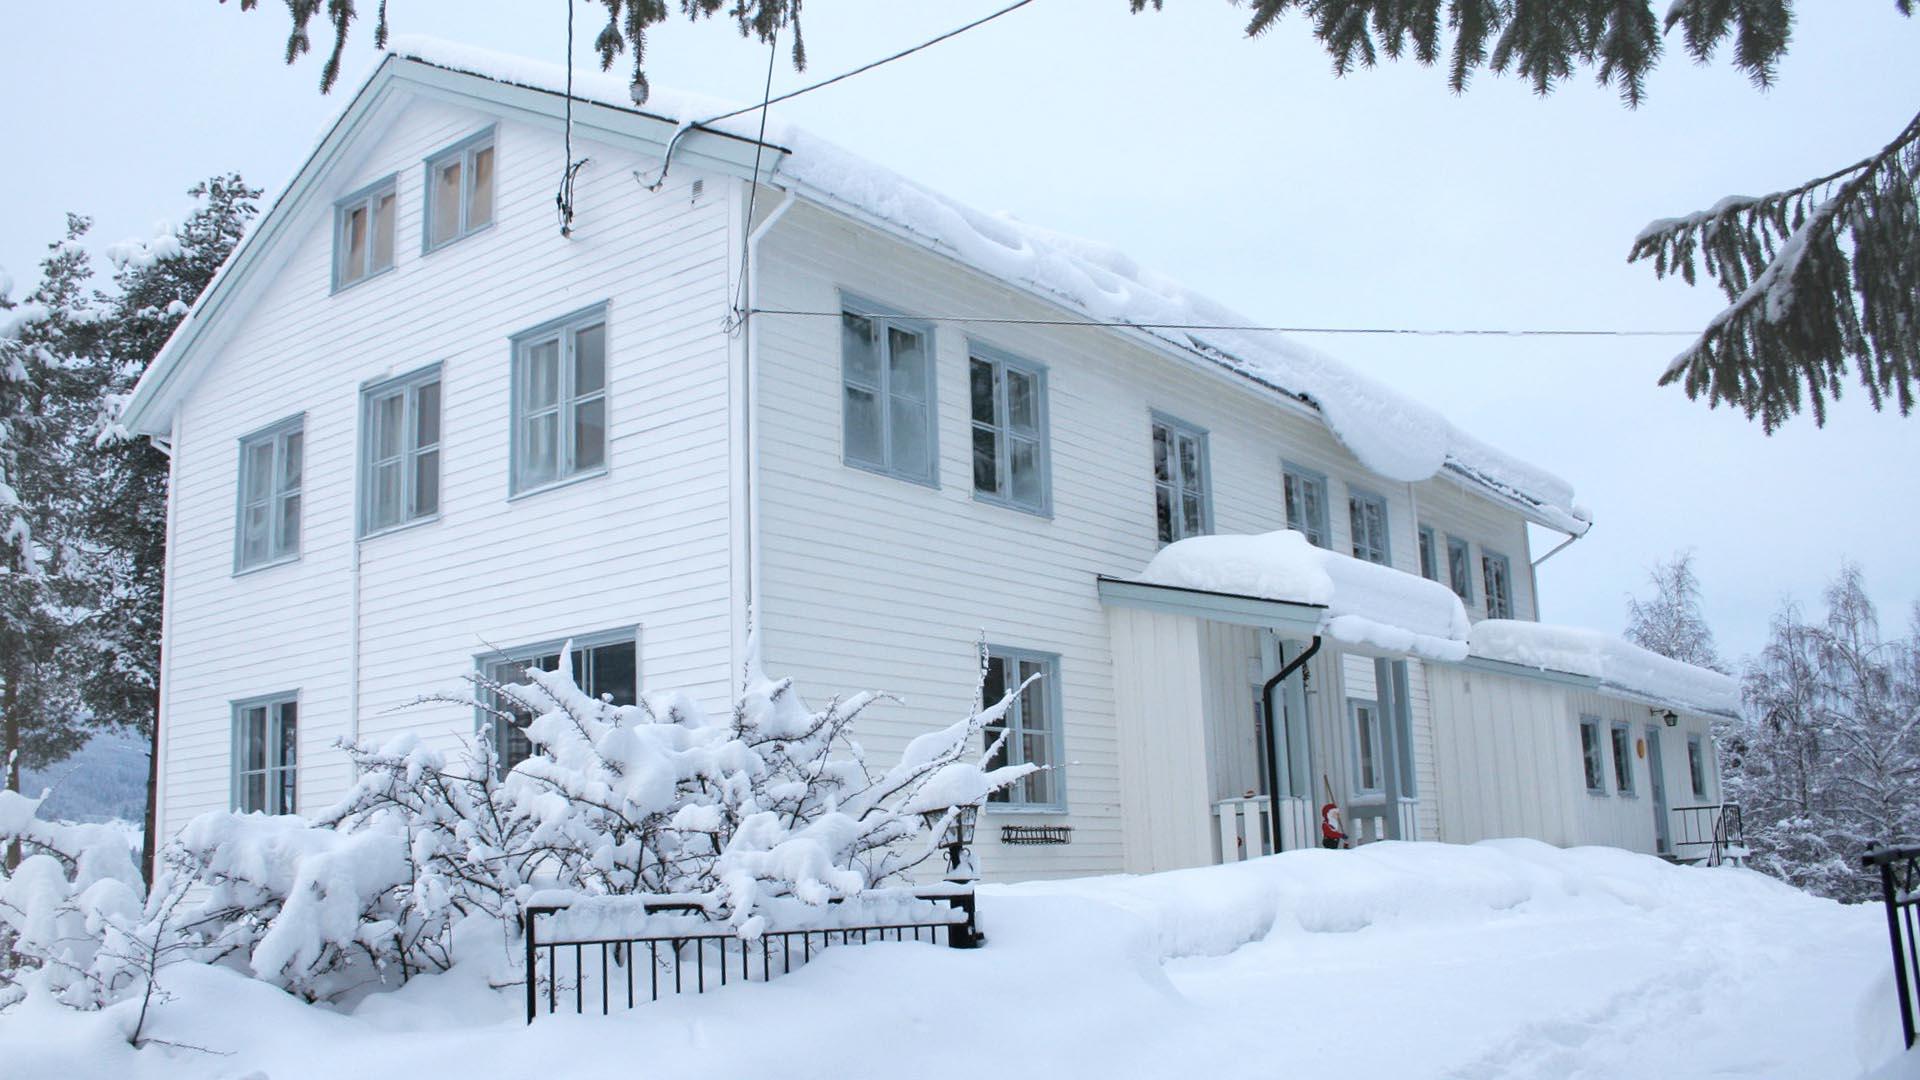 A white wooden house after snowfall